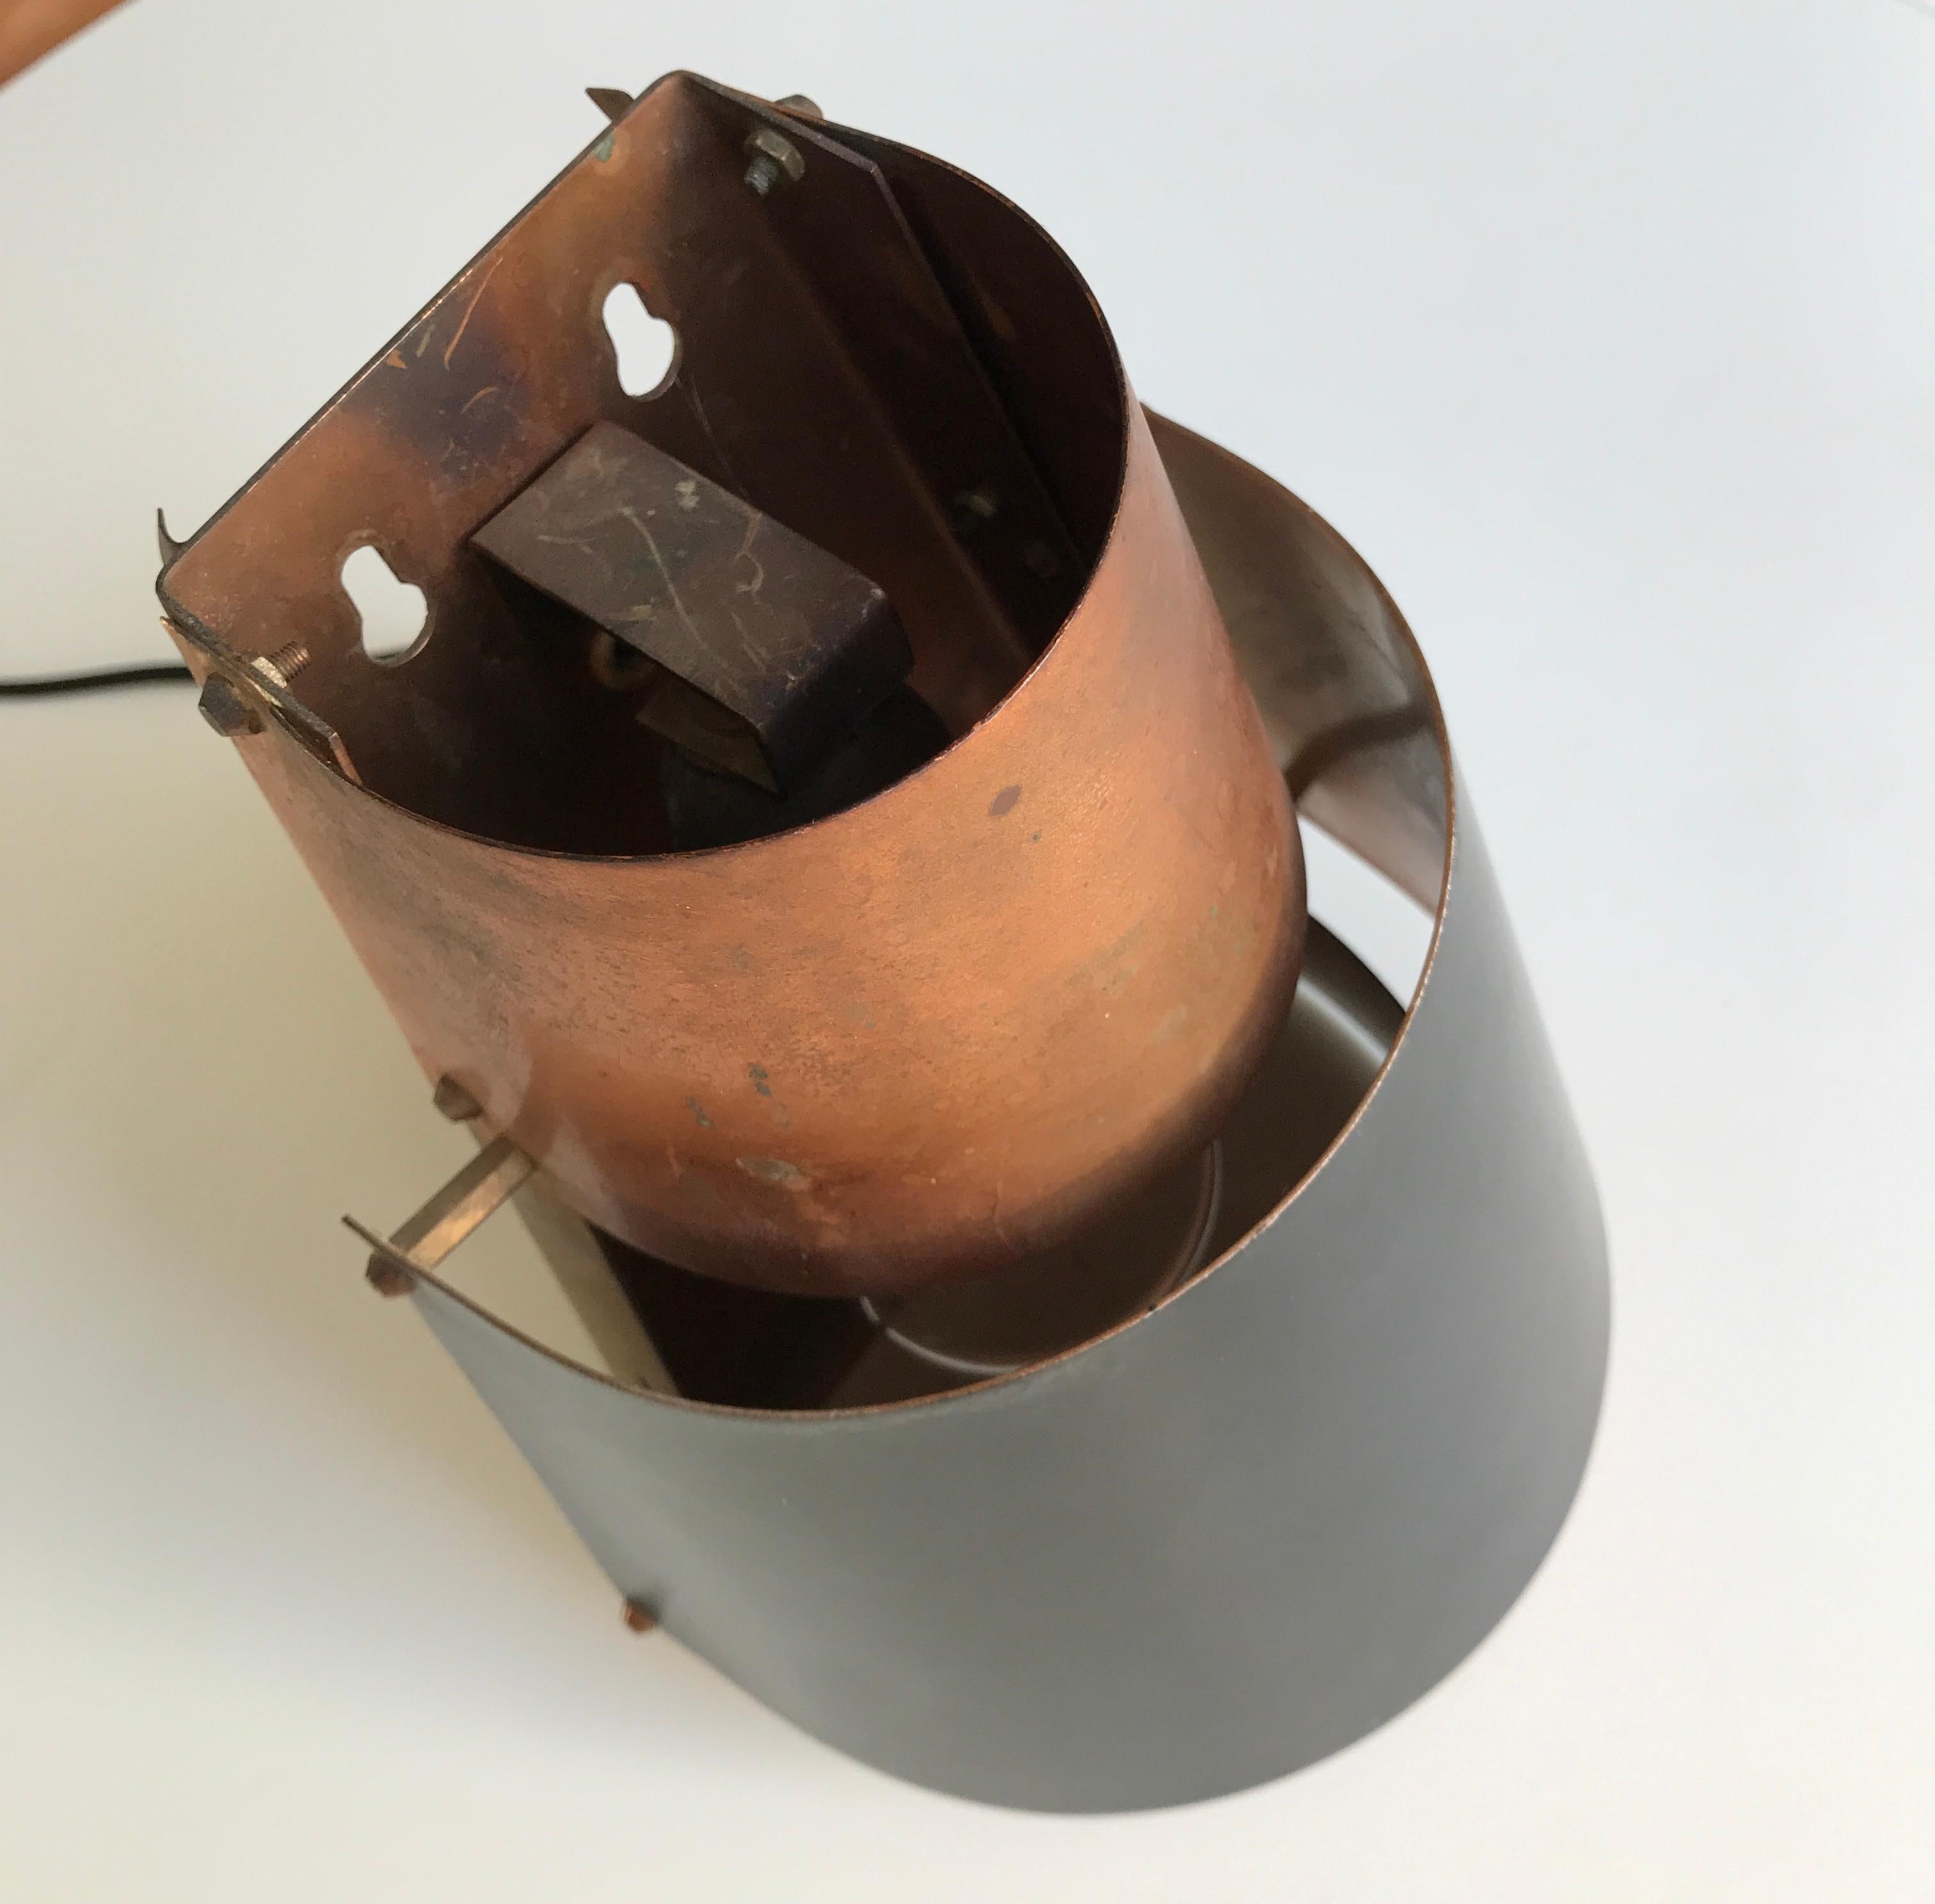 Danish Design Mid-century wall light by Bent Karlby for Lyfa, 1950s. Østerport is the name on a local train station in Copenhagen. Copper and black matte shades that creates a diffuse light. Original condition. E27 bulb socket holder. Free shipping